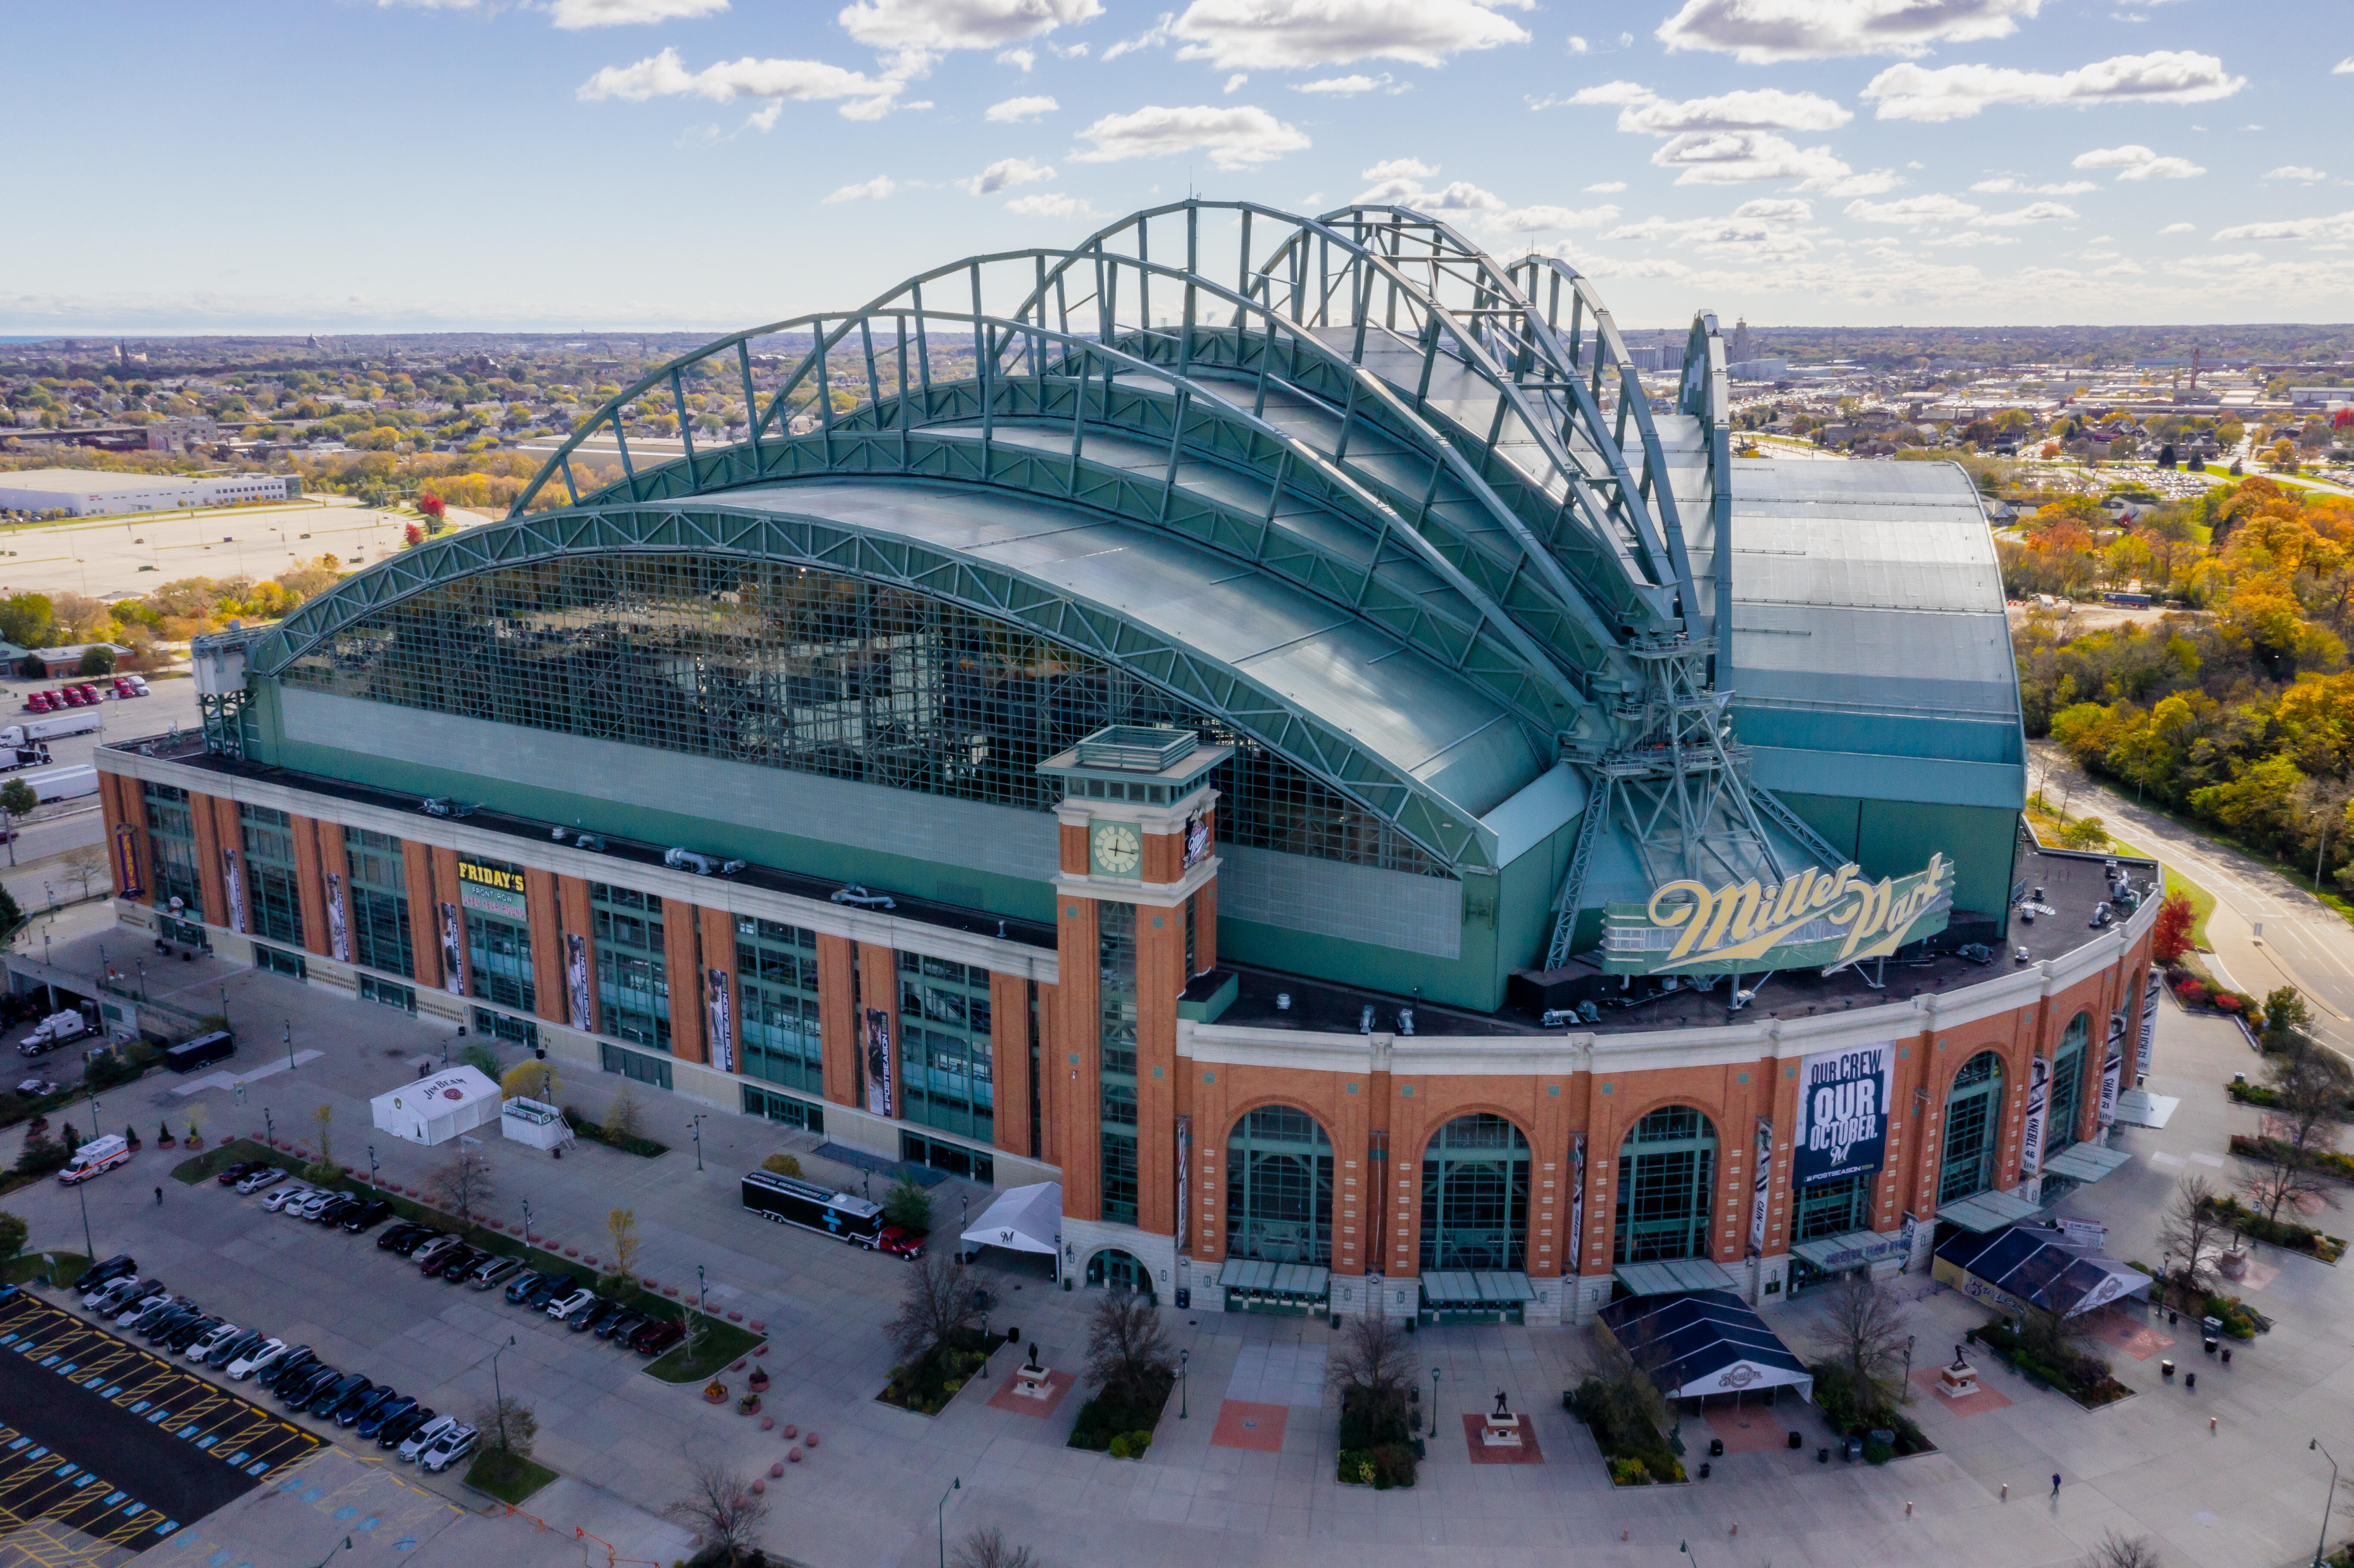 Milwaukee Brewers take over Miller Park shops; cut prices, add items